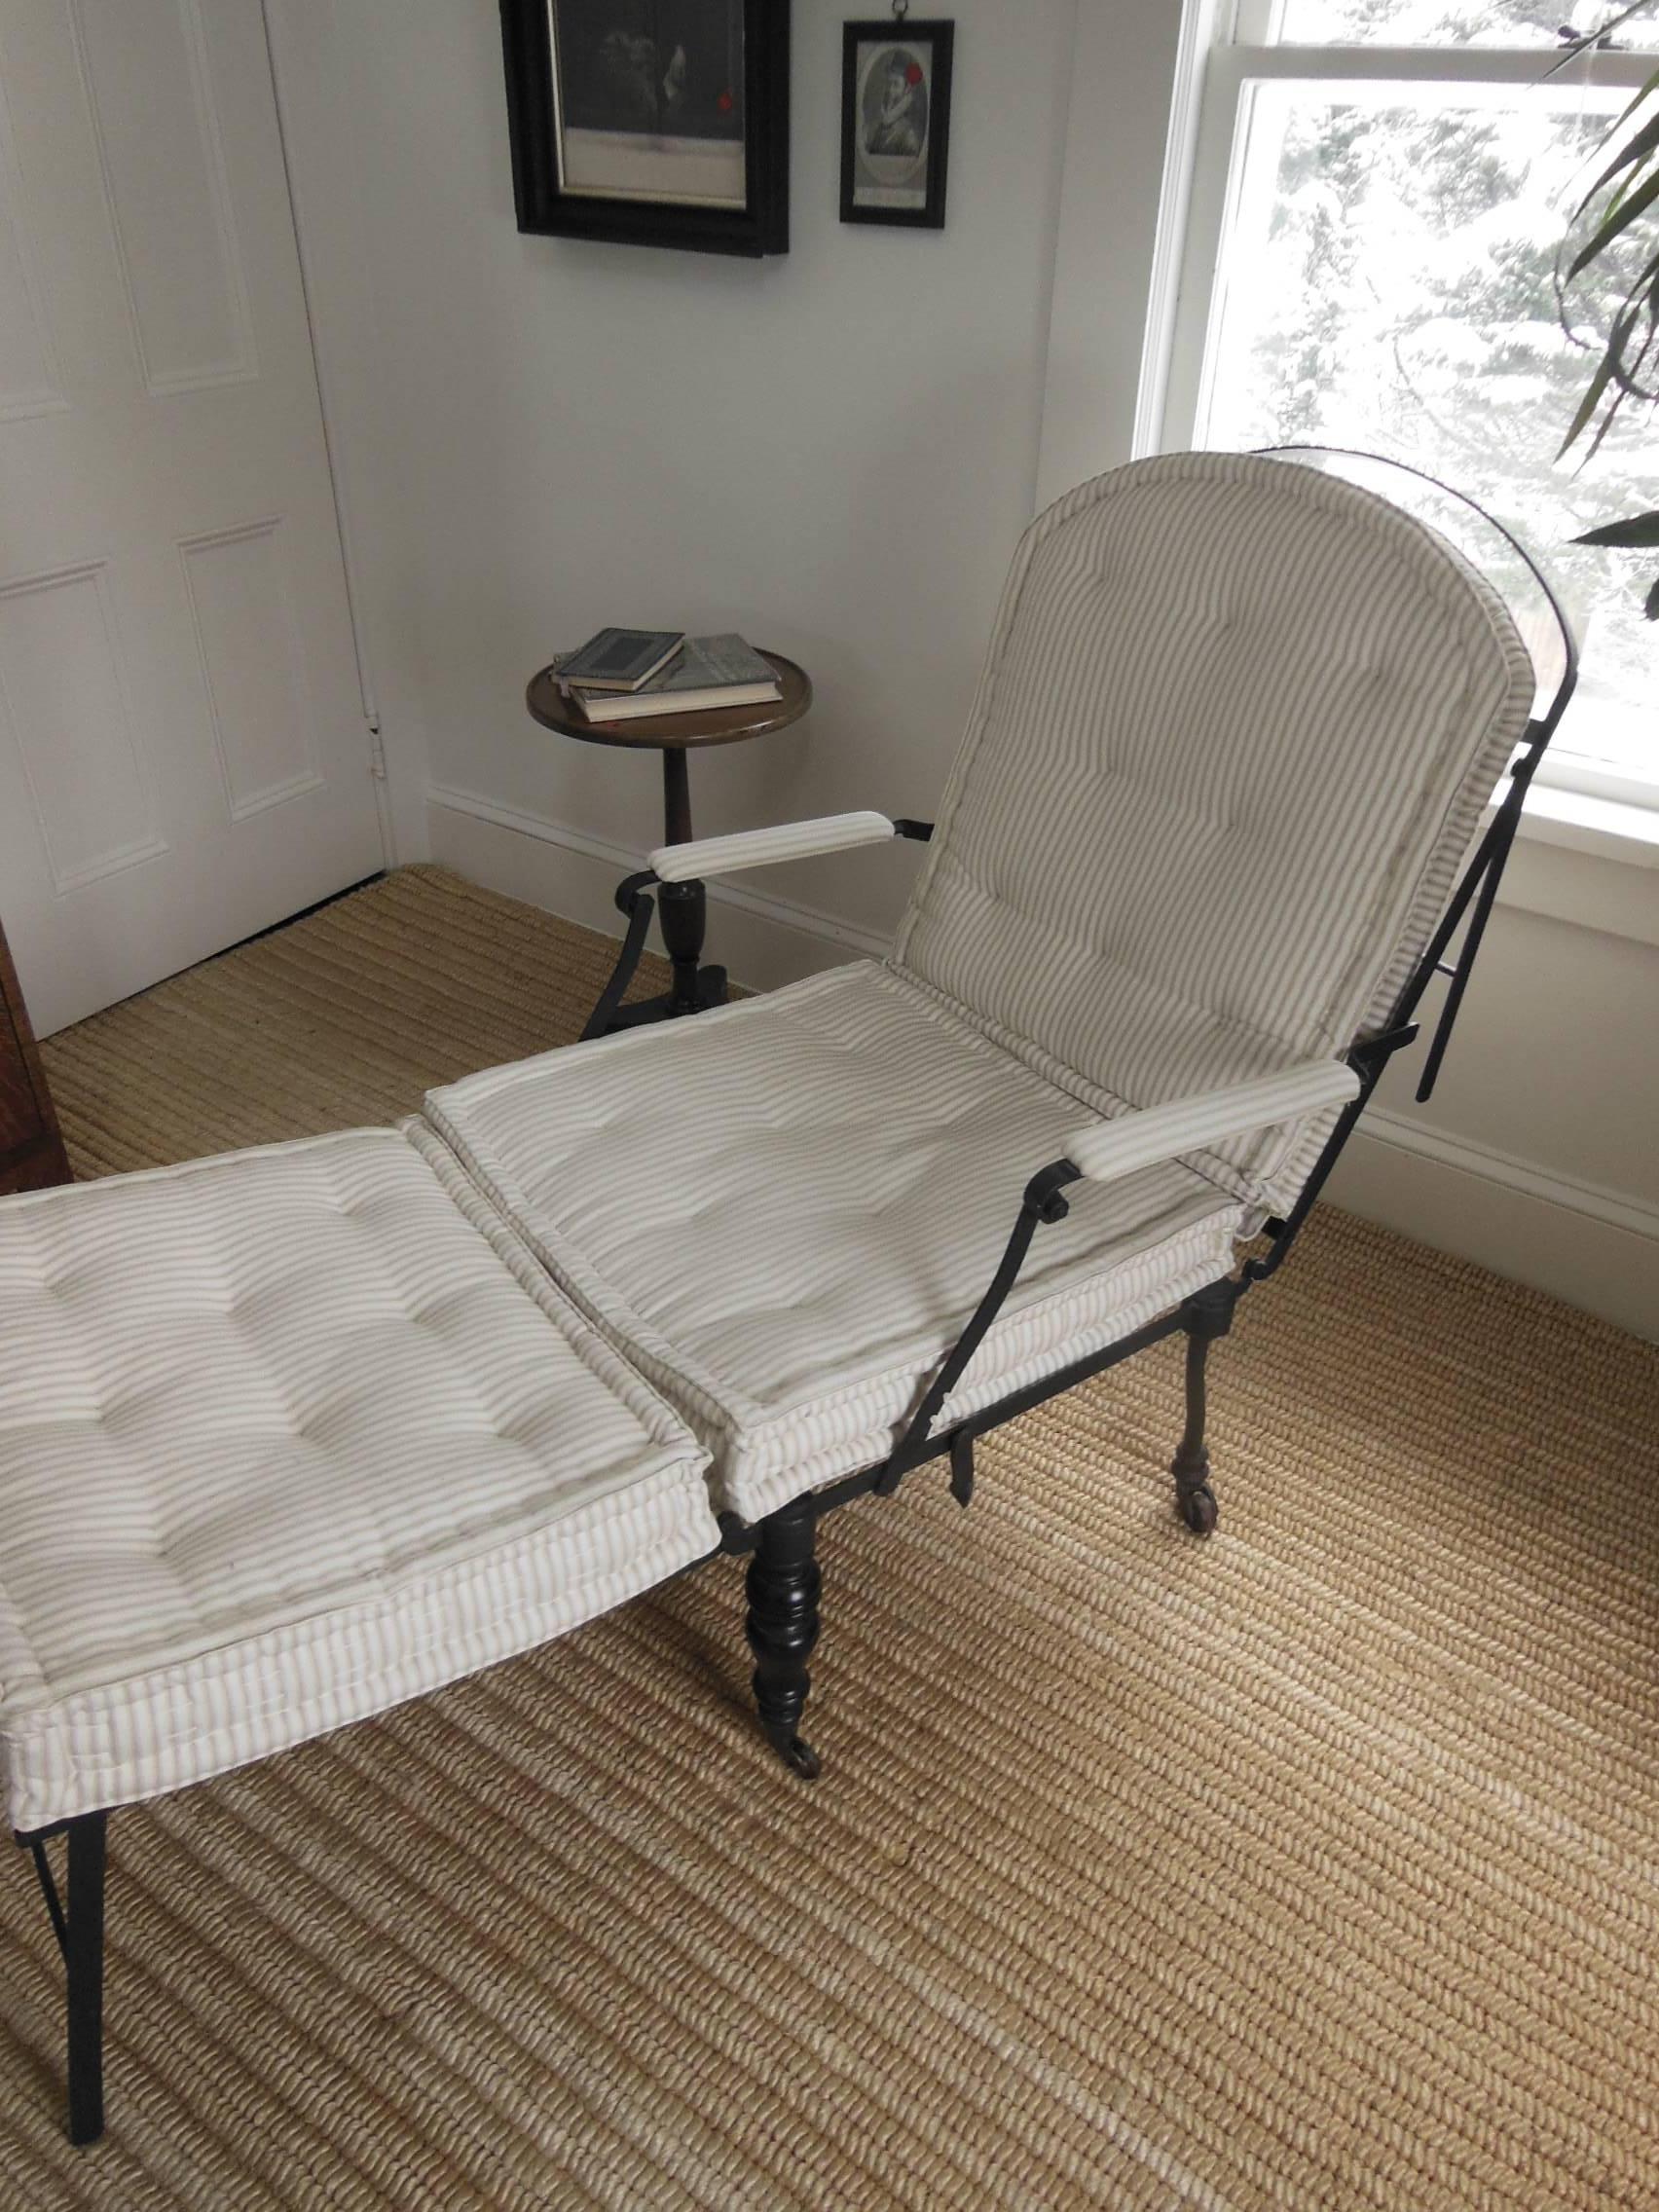 Vintage French Iron Folding Chaise In Excellent Condition For Sale In Sag Harbor, NY